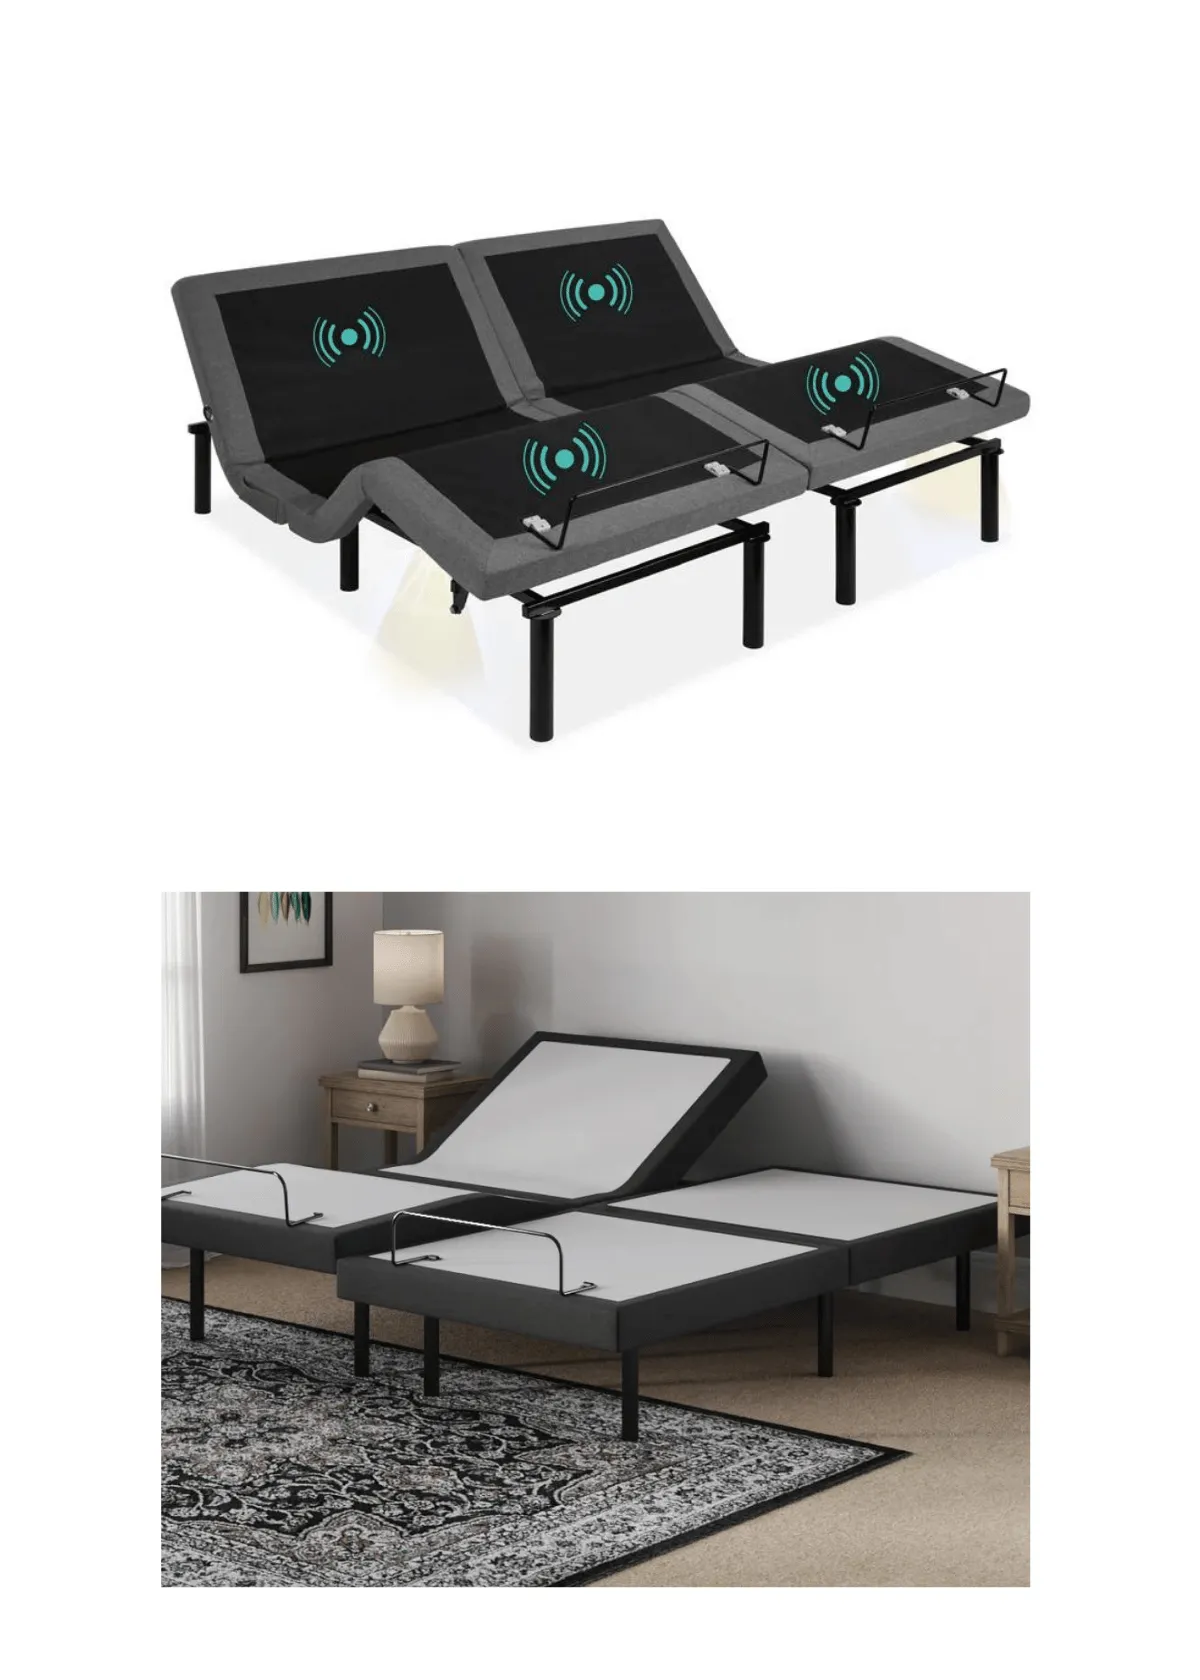 "What Is an Ergonomic Bed Frame & How Does It Benefit Sleepers?"